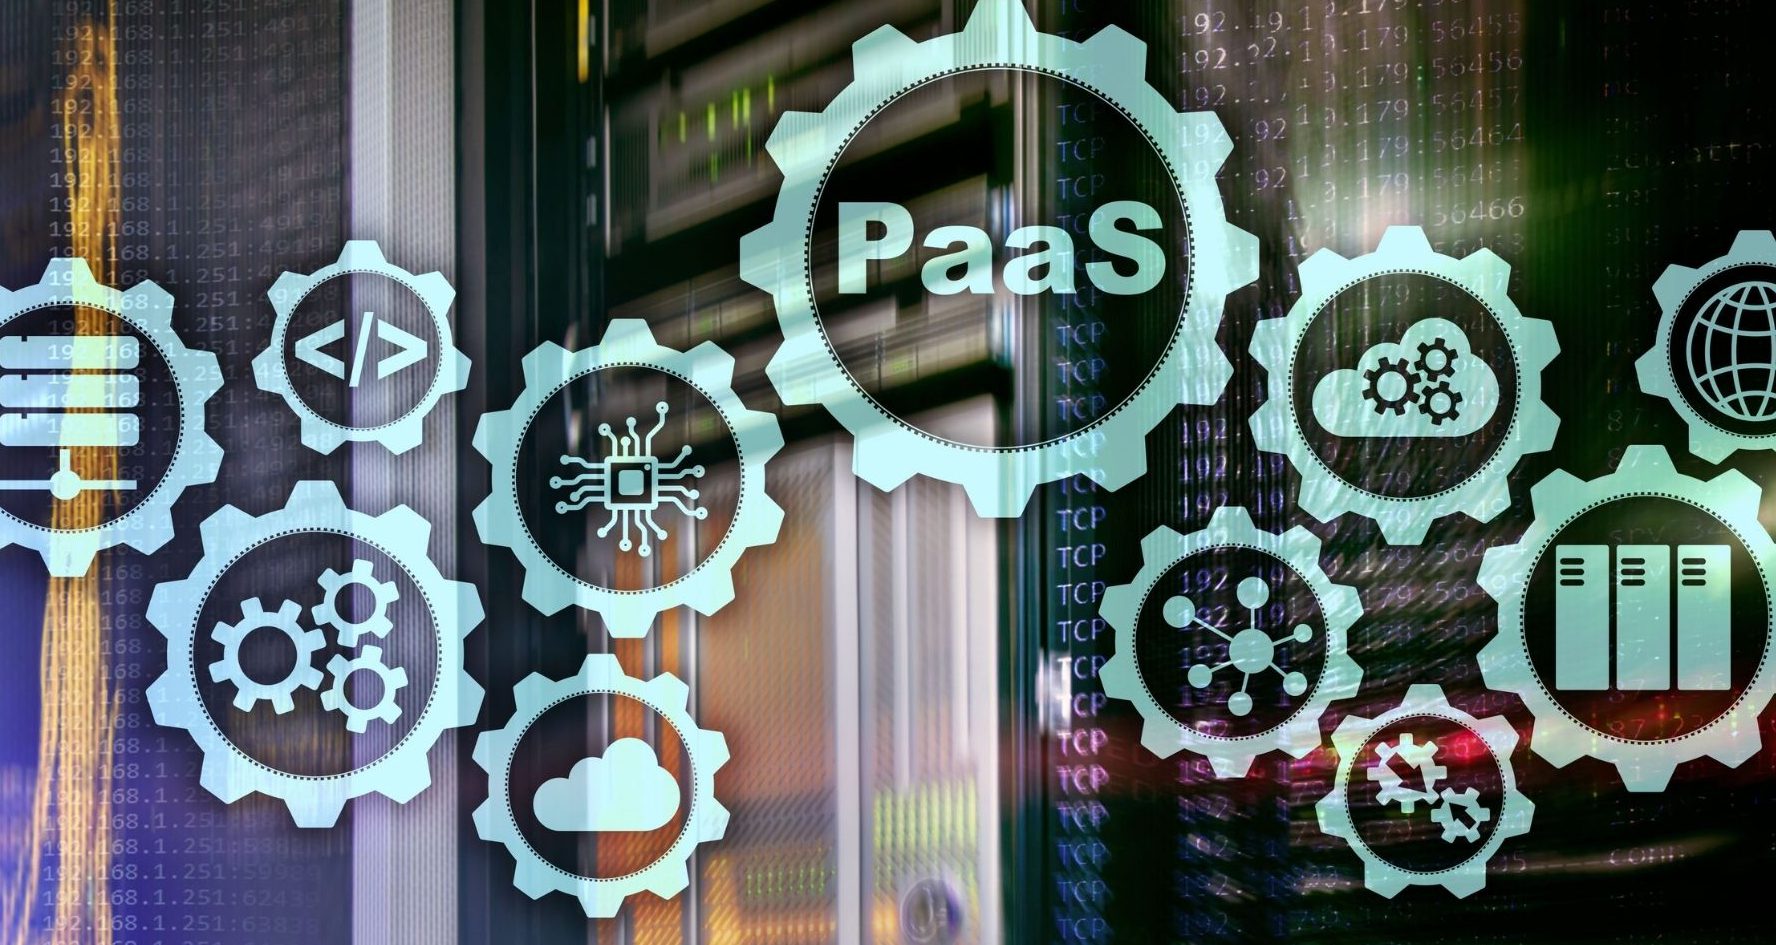 Global Platform As A Service (PaaS) Market Overview And Prospects